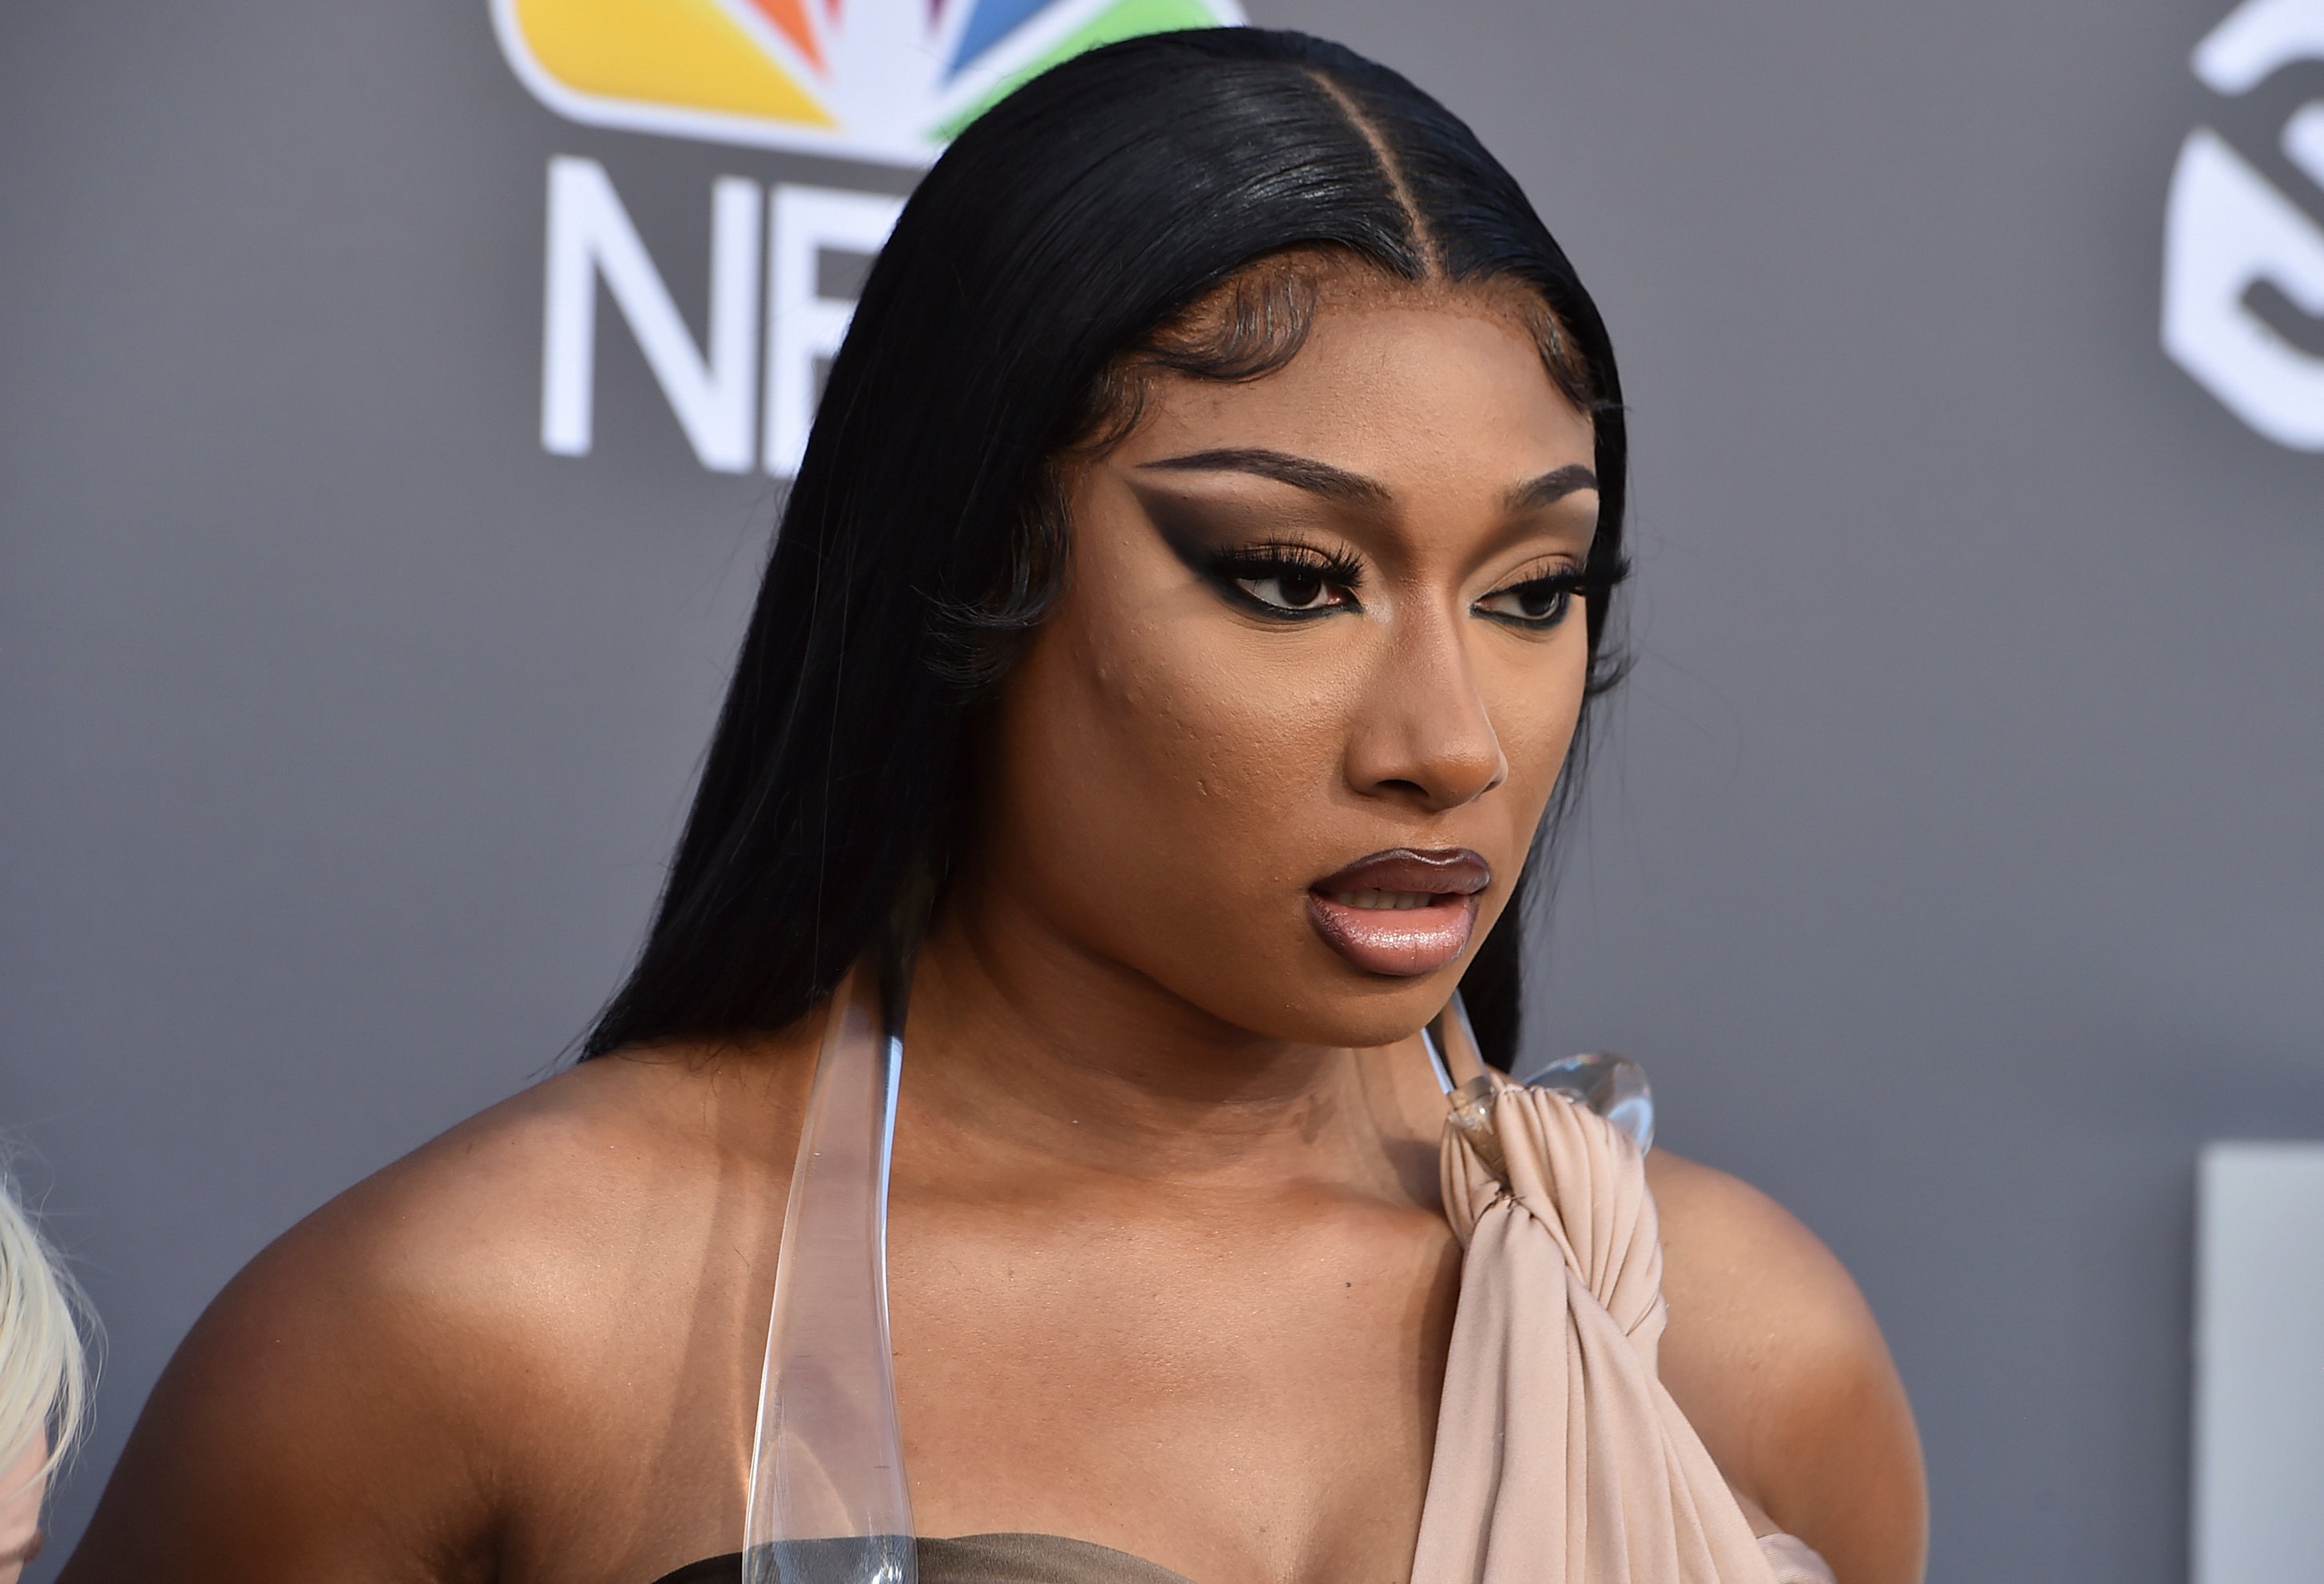 Megan Thee Stallion arrives at the Billboard Music Awards at the MGM Grand Garden Arena, May 15, 2022, in Las Vegas. A photographer who worked for the hip-hop star said in a lawsuit filed Tuesday